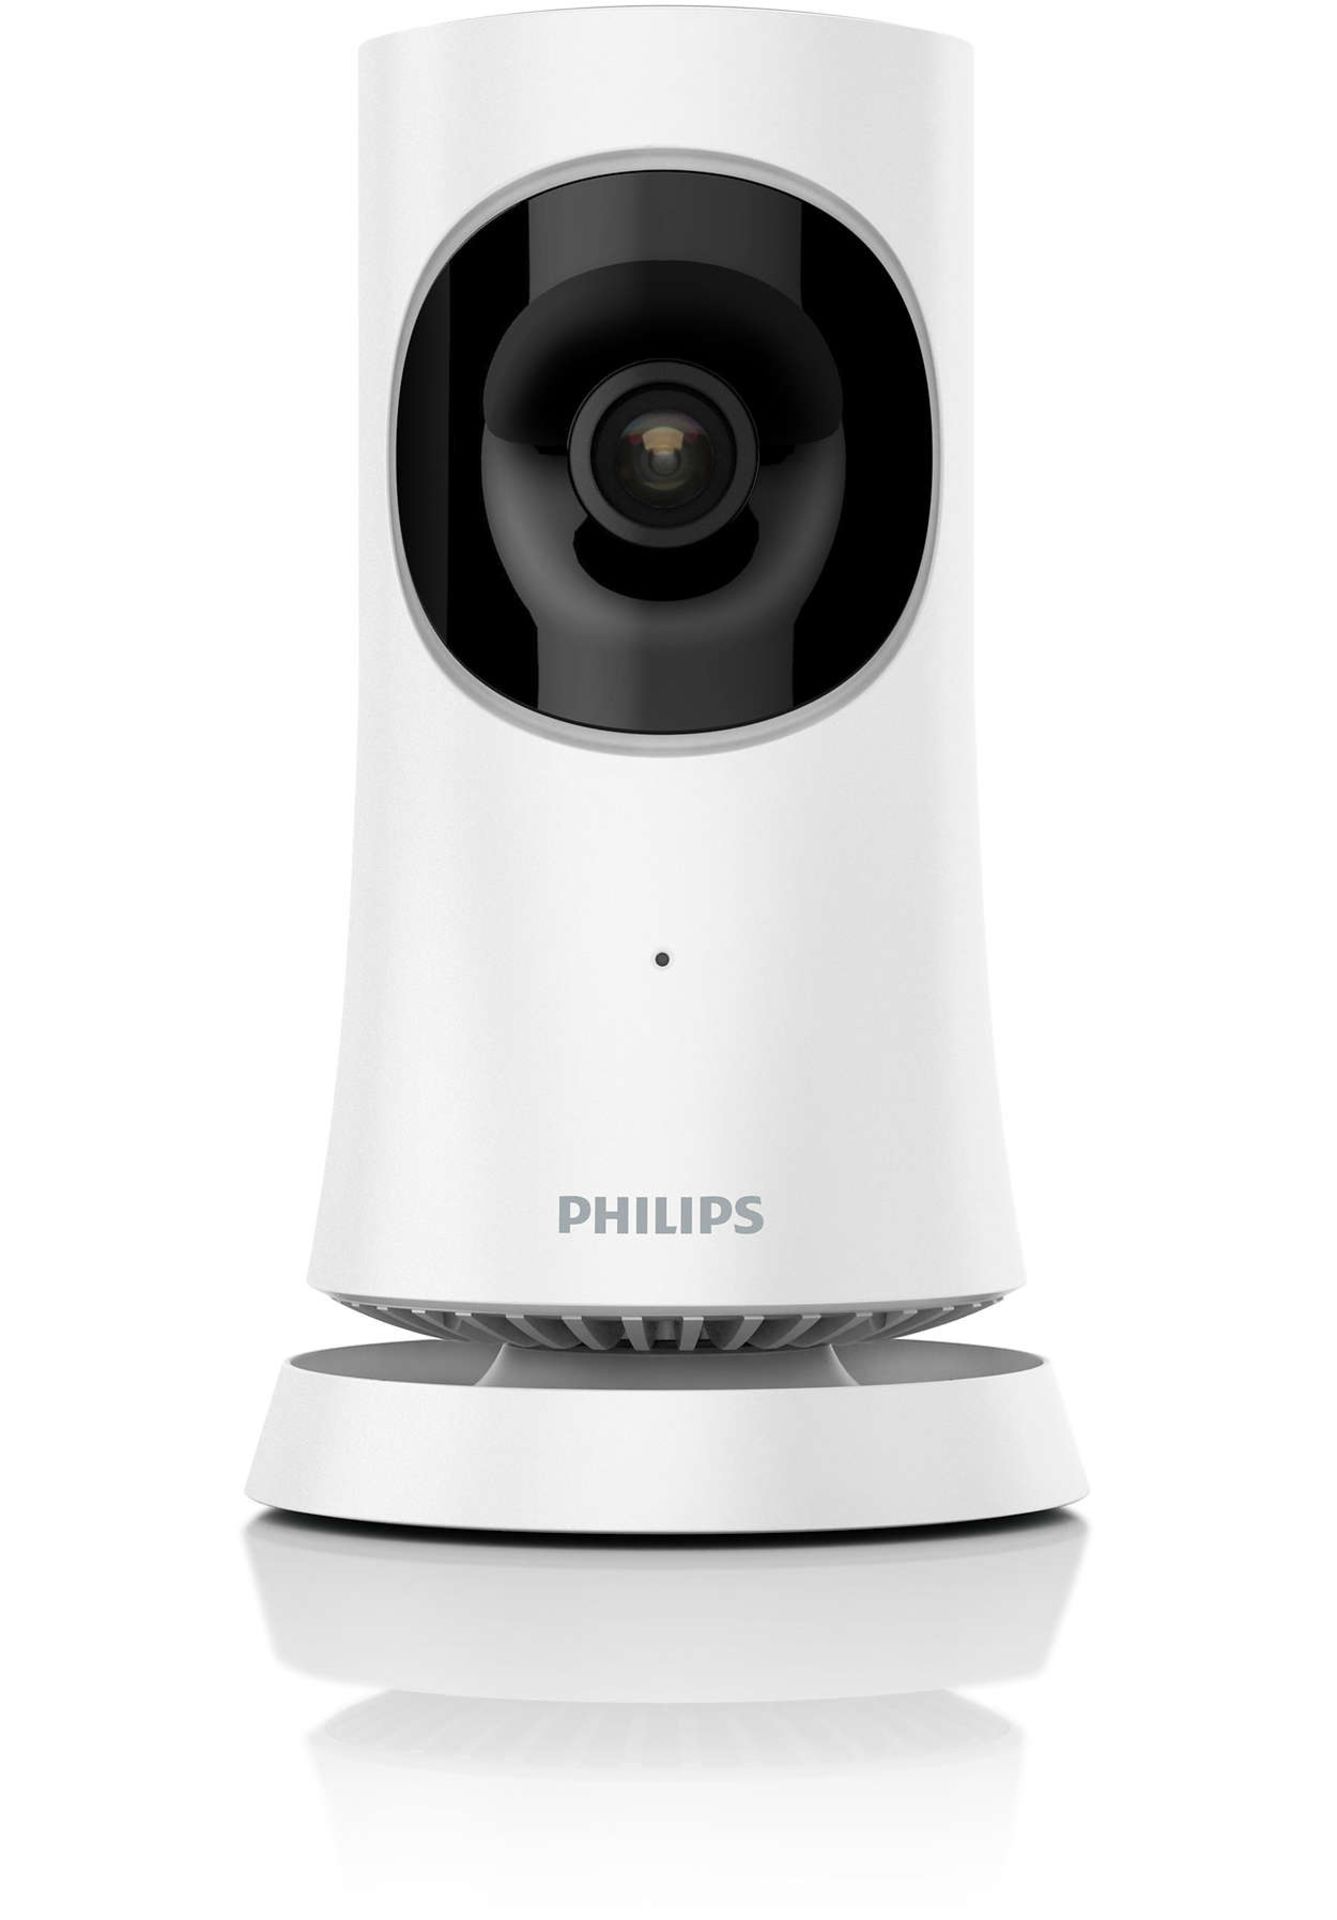 V Brand New Philips Ivideon Wide Angle HD Home Security Camera With Wall Mount Amazon Price £89.99